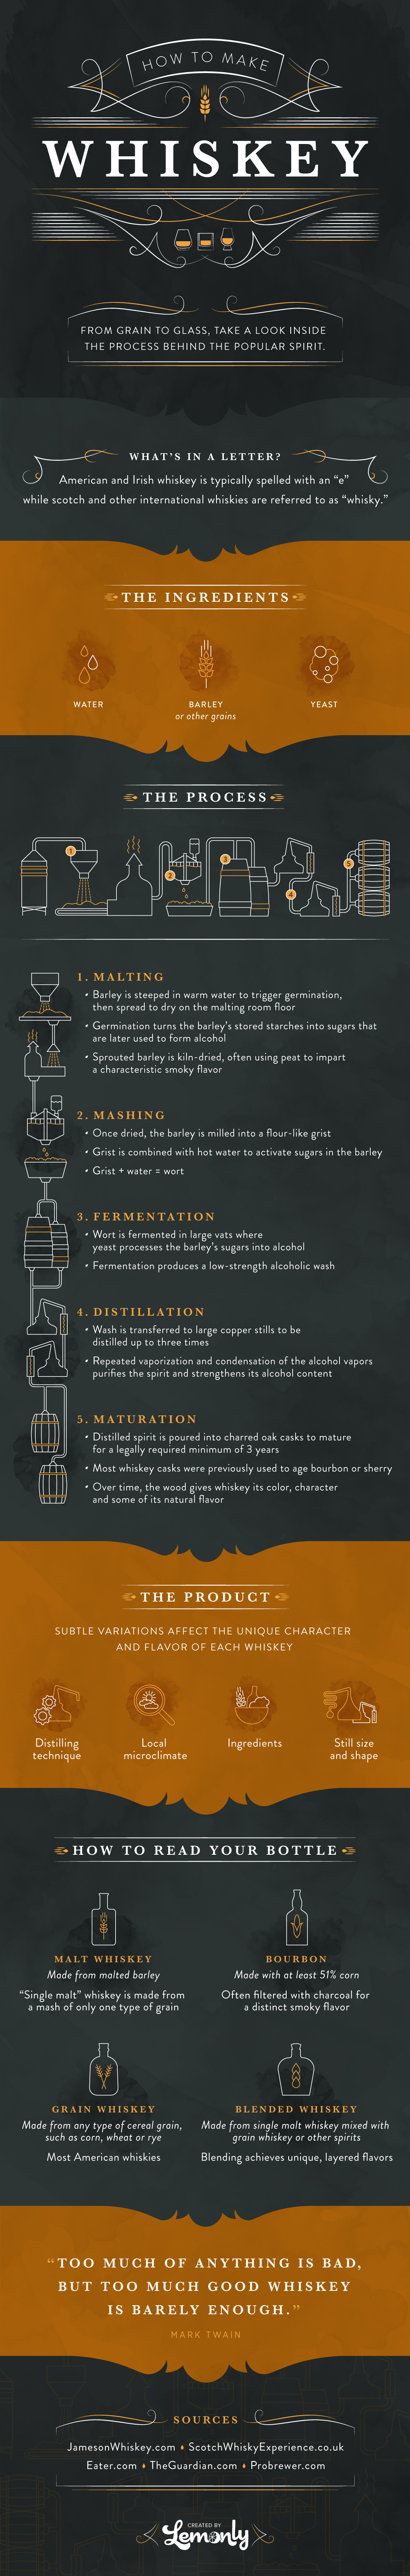 From Grain to Glass: Process of Making a Perfect Whisky - Infographic